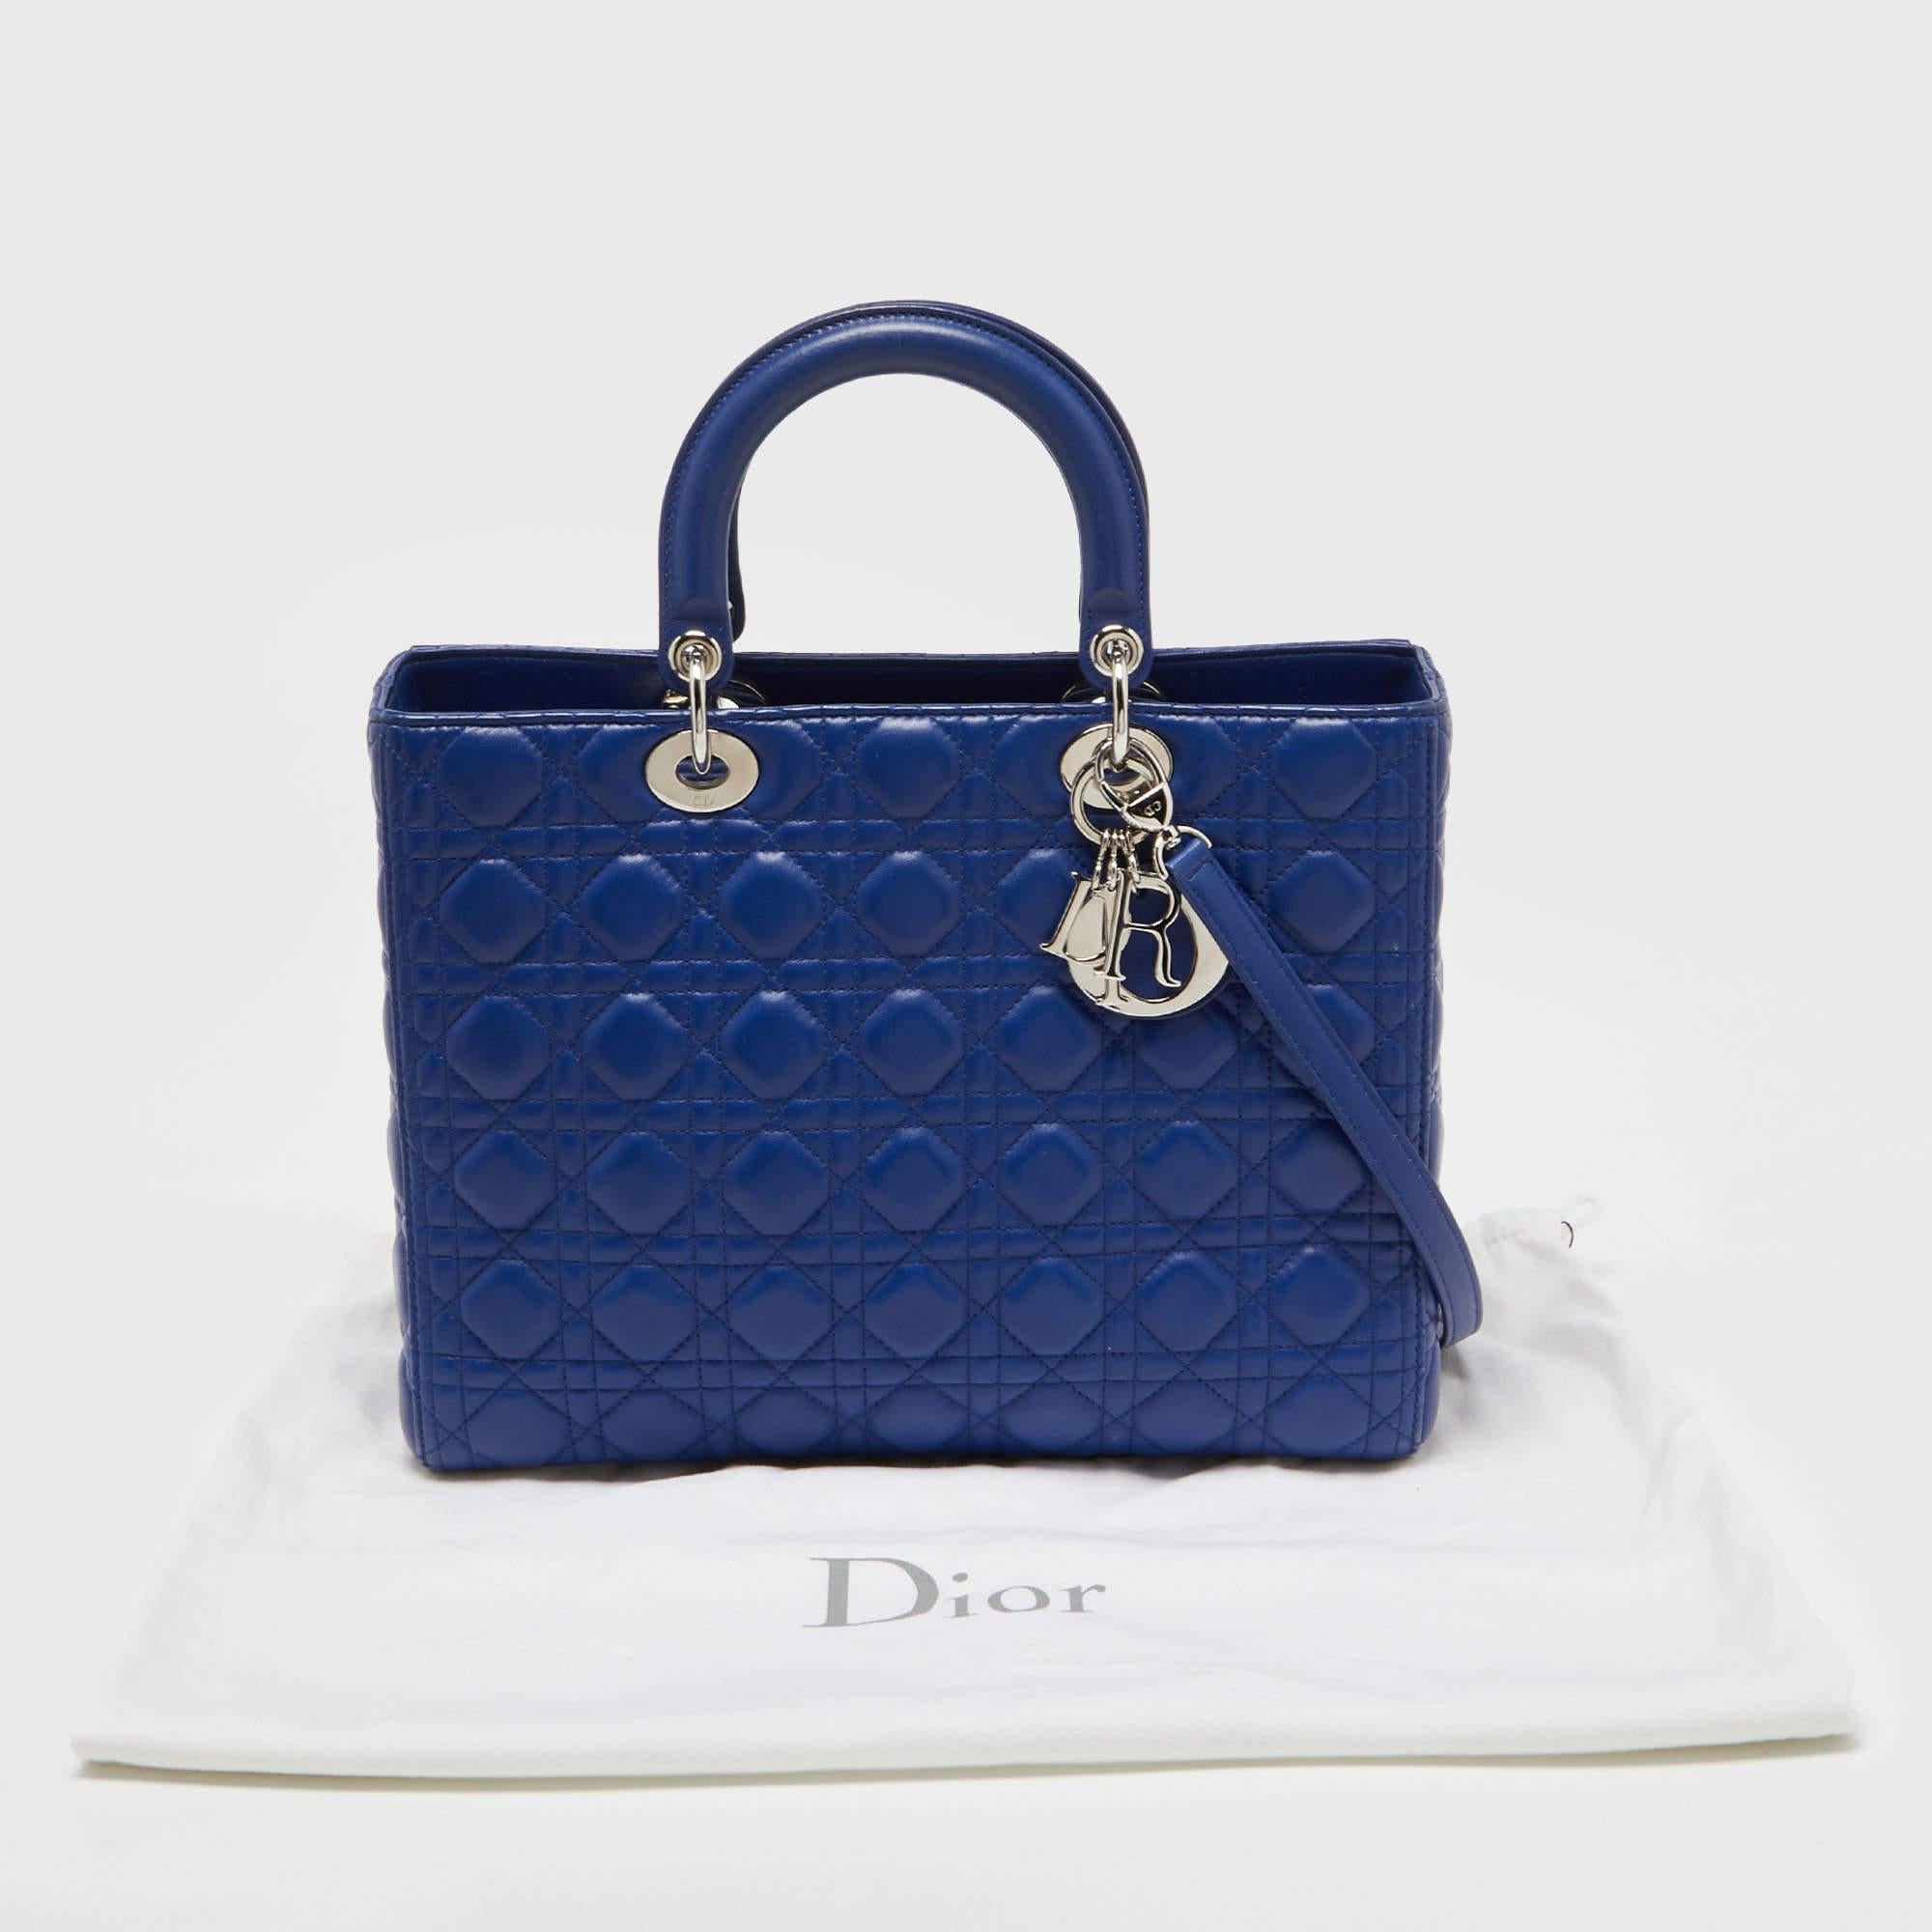 Dior Blue Cannage Leather Large Lady Dior Tote 2